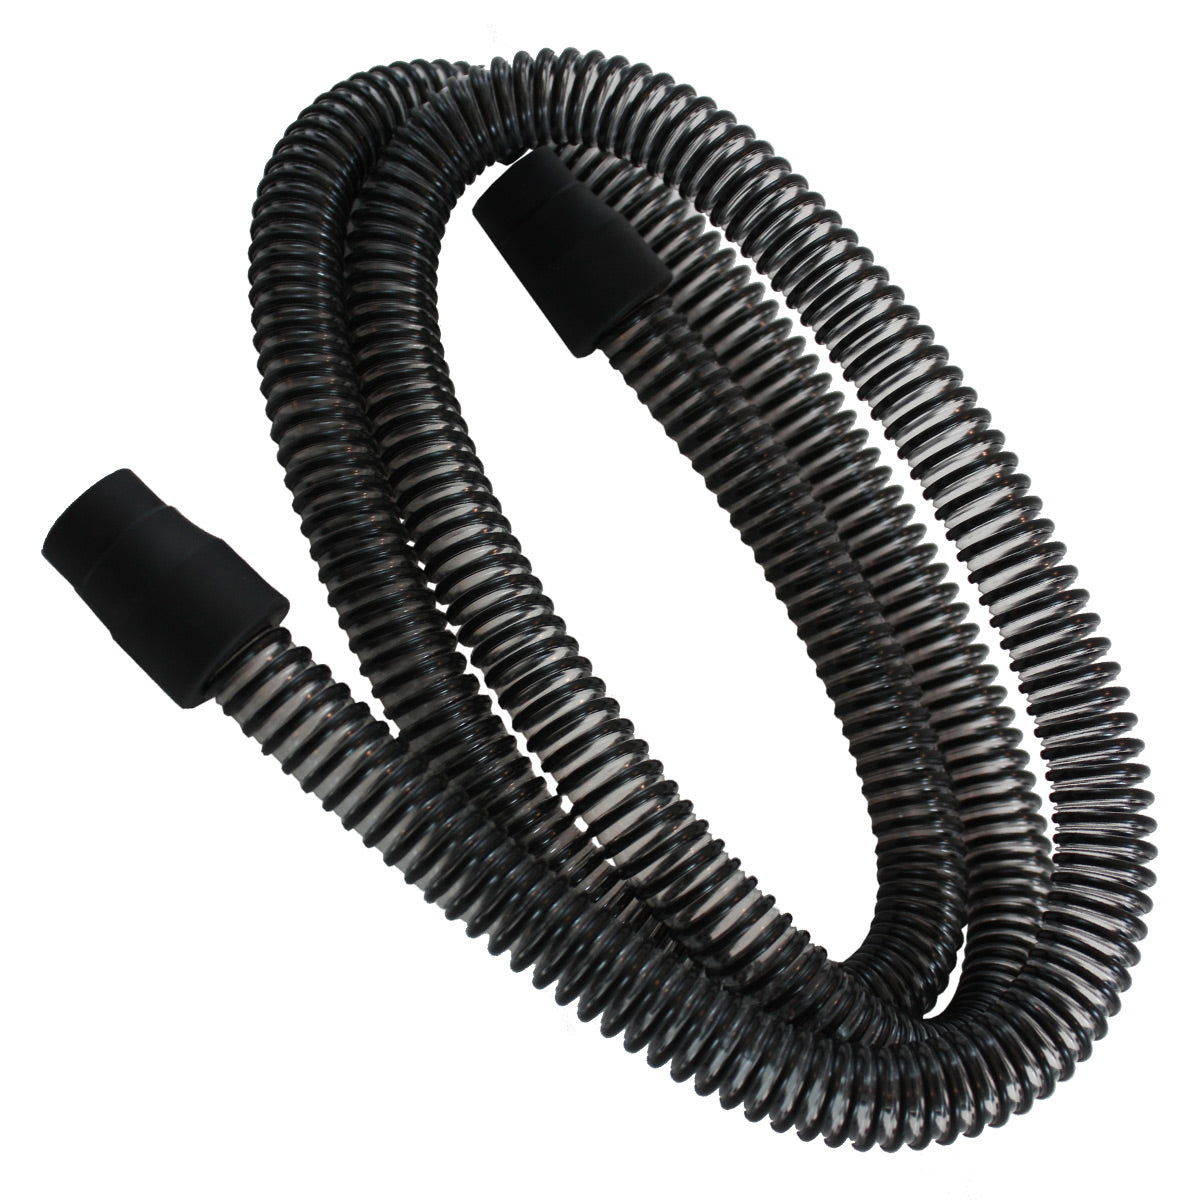 Ultra Noir CPAP Tubing from 3B Medical is made of high quality, long lasting materials. The tubing's smooth bore inner core ensures whisper quiet operation; and the ribbed outer surface provides flexibility and durability. Each tube has two strong, medical grade, rubber endcaps for a secure connection between your mask, your tube and your machine. We are located in New Jersey. Free shipping and delivery are available.